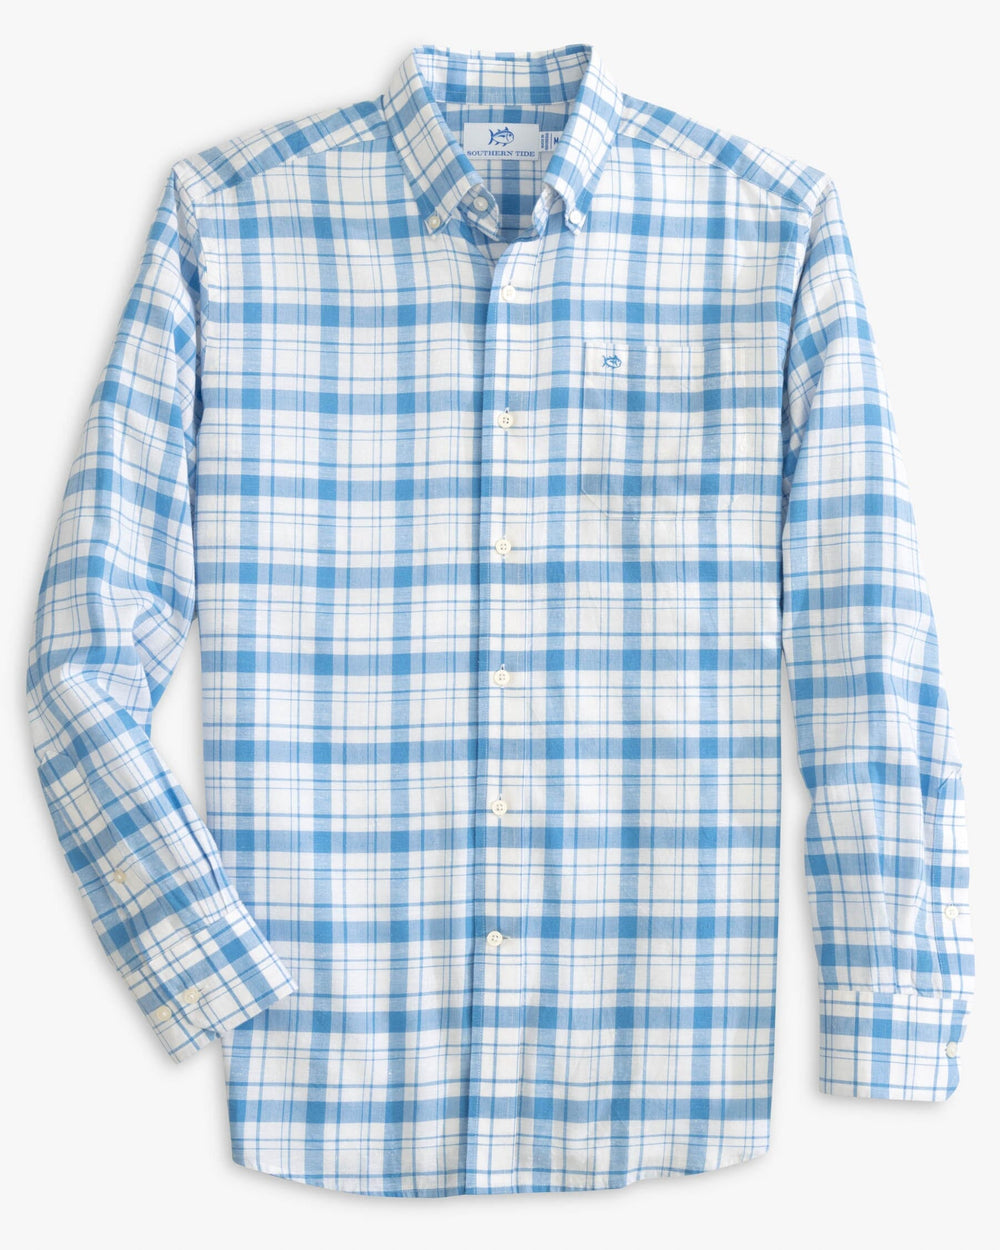 The front view of the Southern Tide Headland Moultire Plaid Long Sleeve Sport Shirt by Southern Tide - Boat Blue